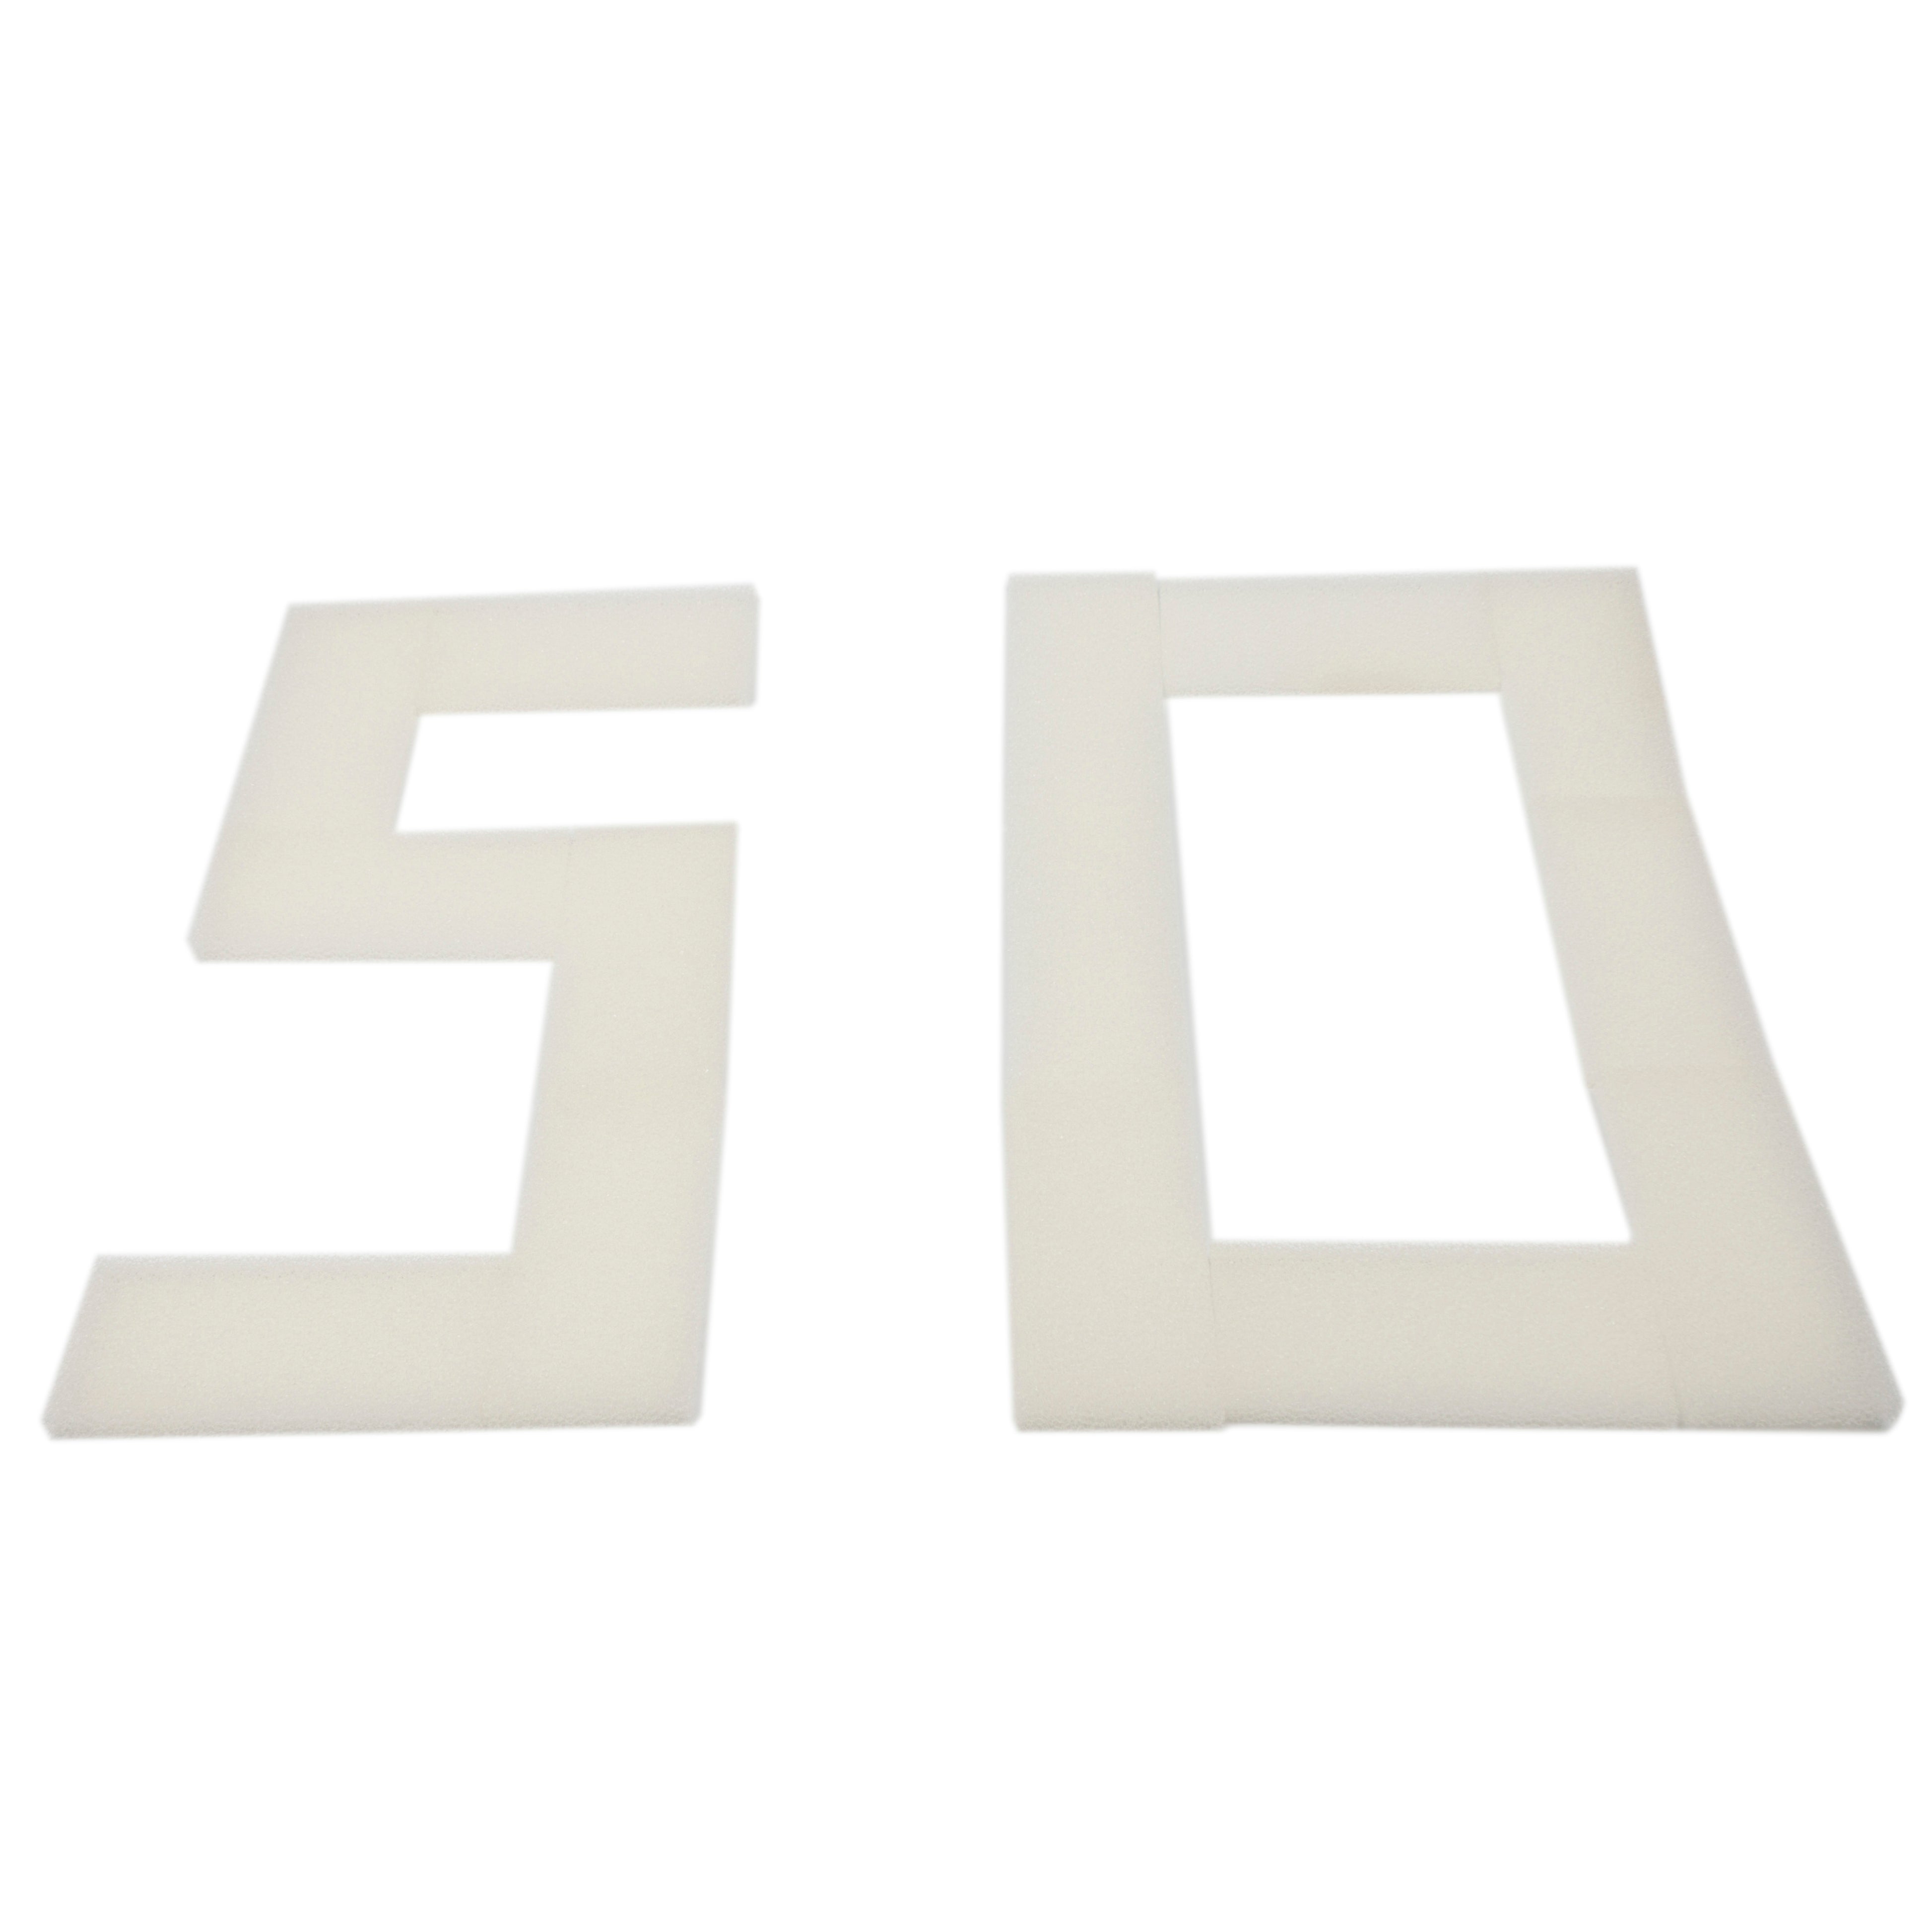 LTWHOME Compatible Foam Filters Non-Branded But Suitable For Fluval U2 Filter (Pack of 50)